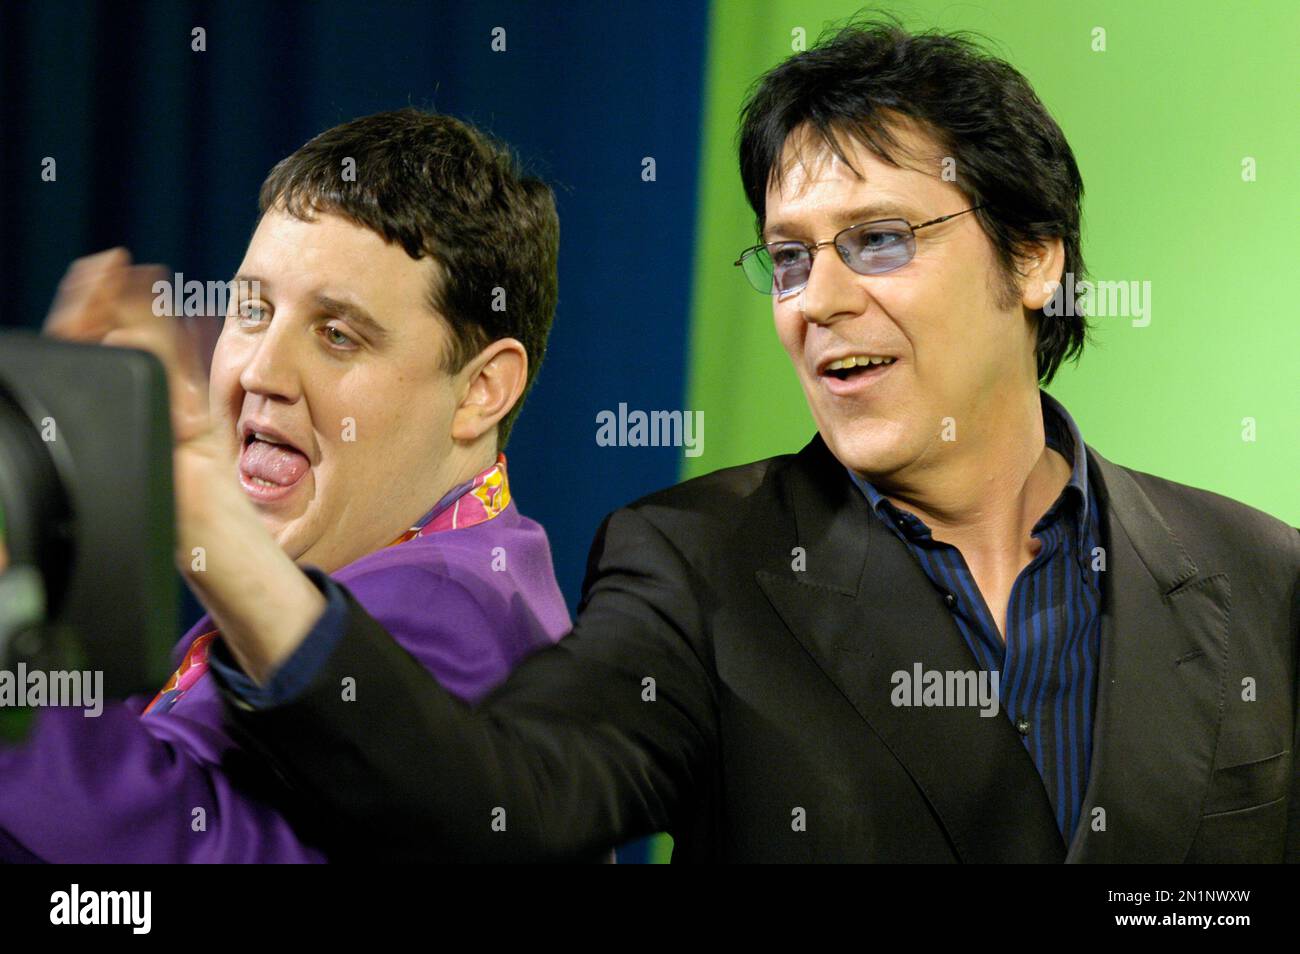 Shakin' Stevens photographed with Peter Kay during the iconic 2005 Comic Relief 'Amarillo' video shoot. Stock Photo